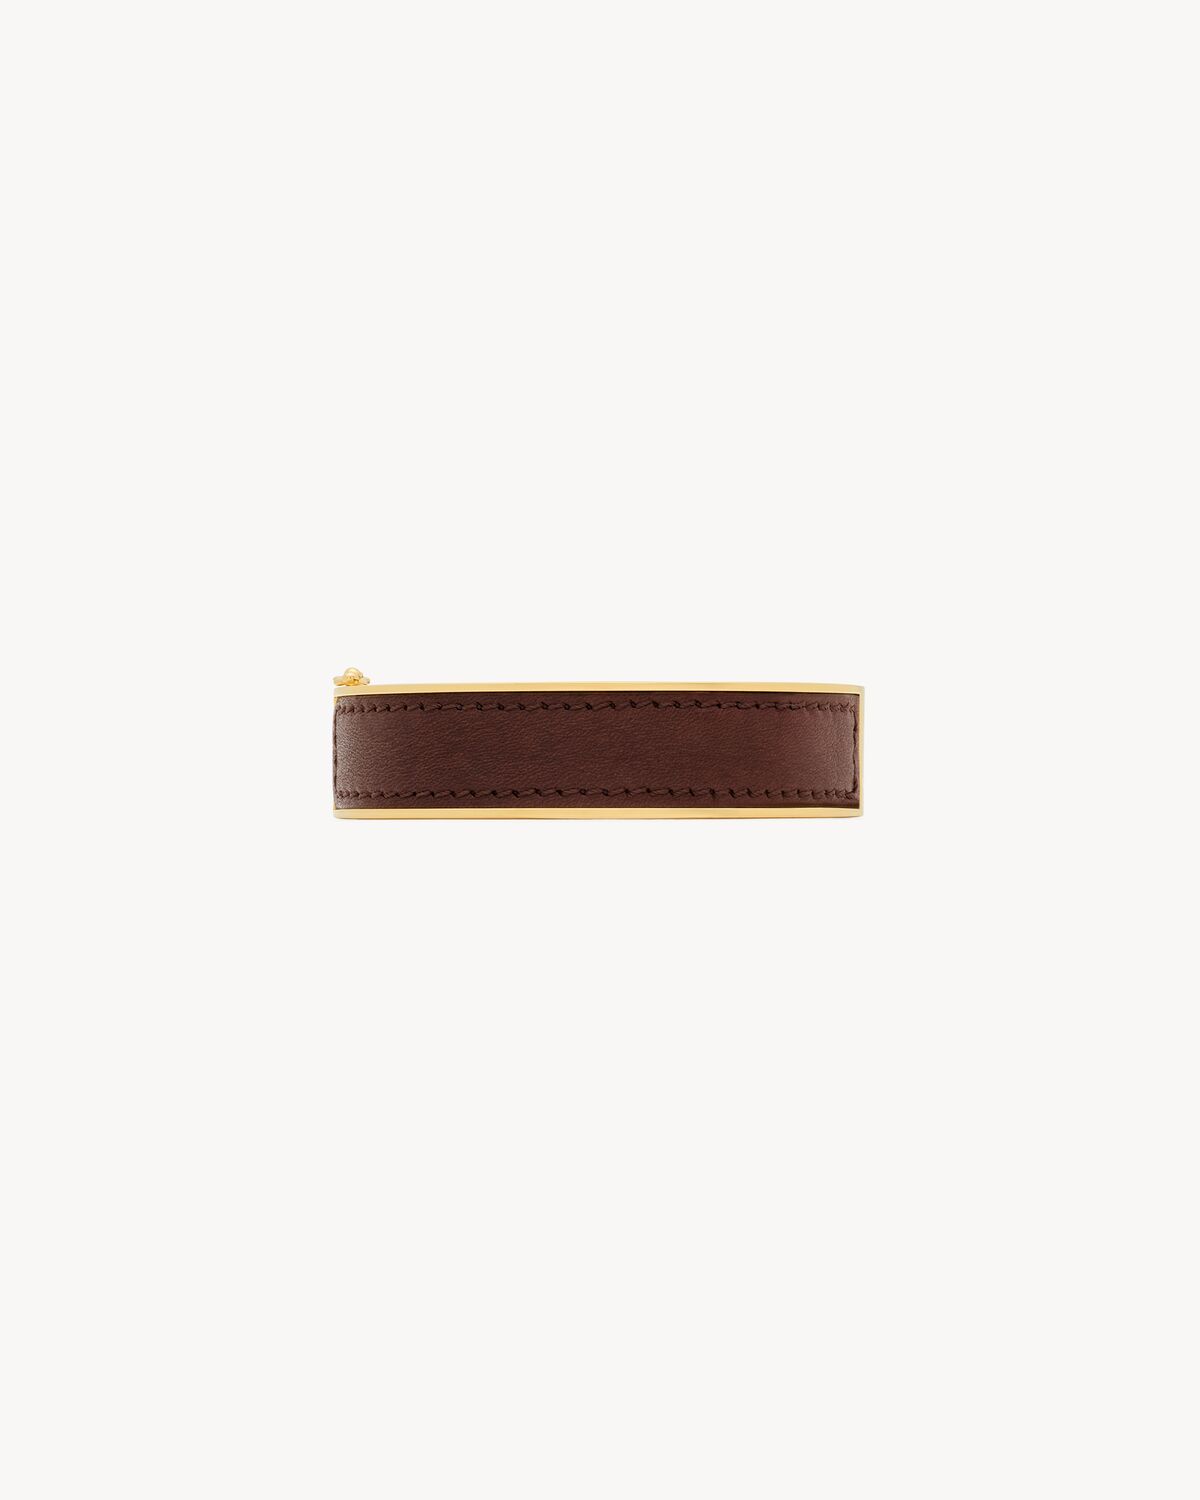 CASSANDRE bracelet in metal and leather